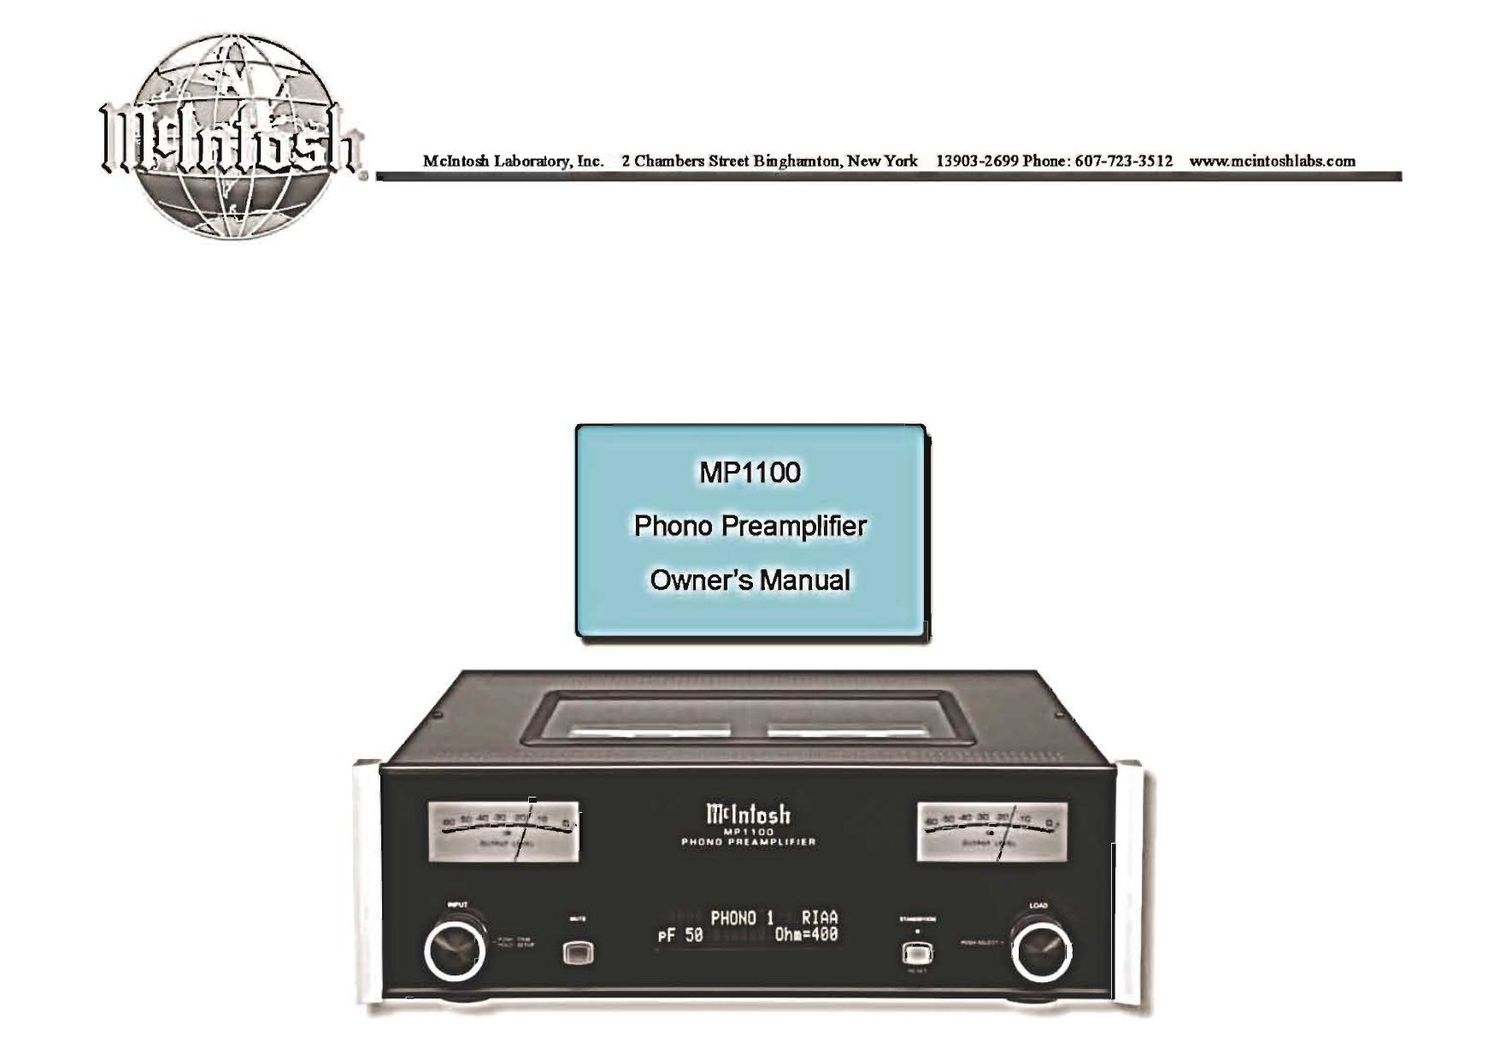 McIntosh MP 1100 Owners Manual